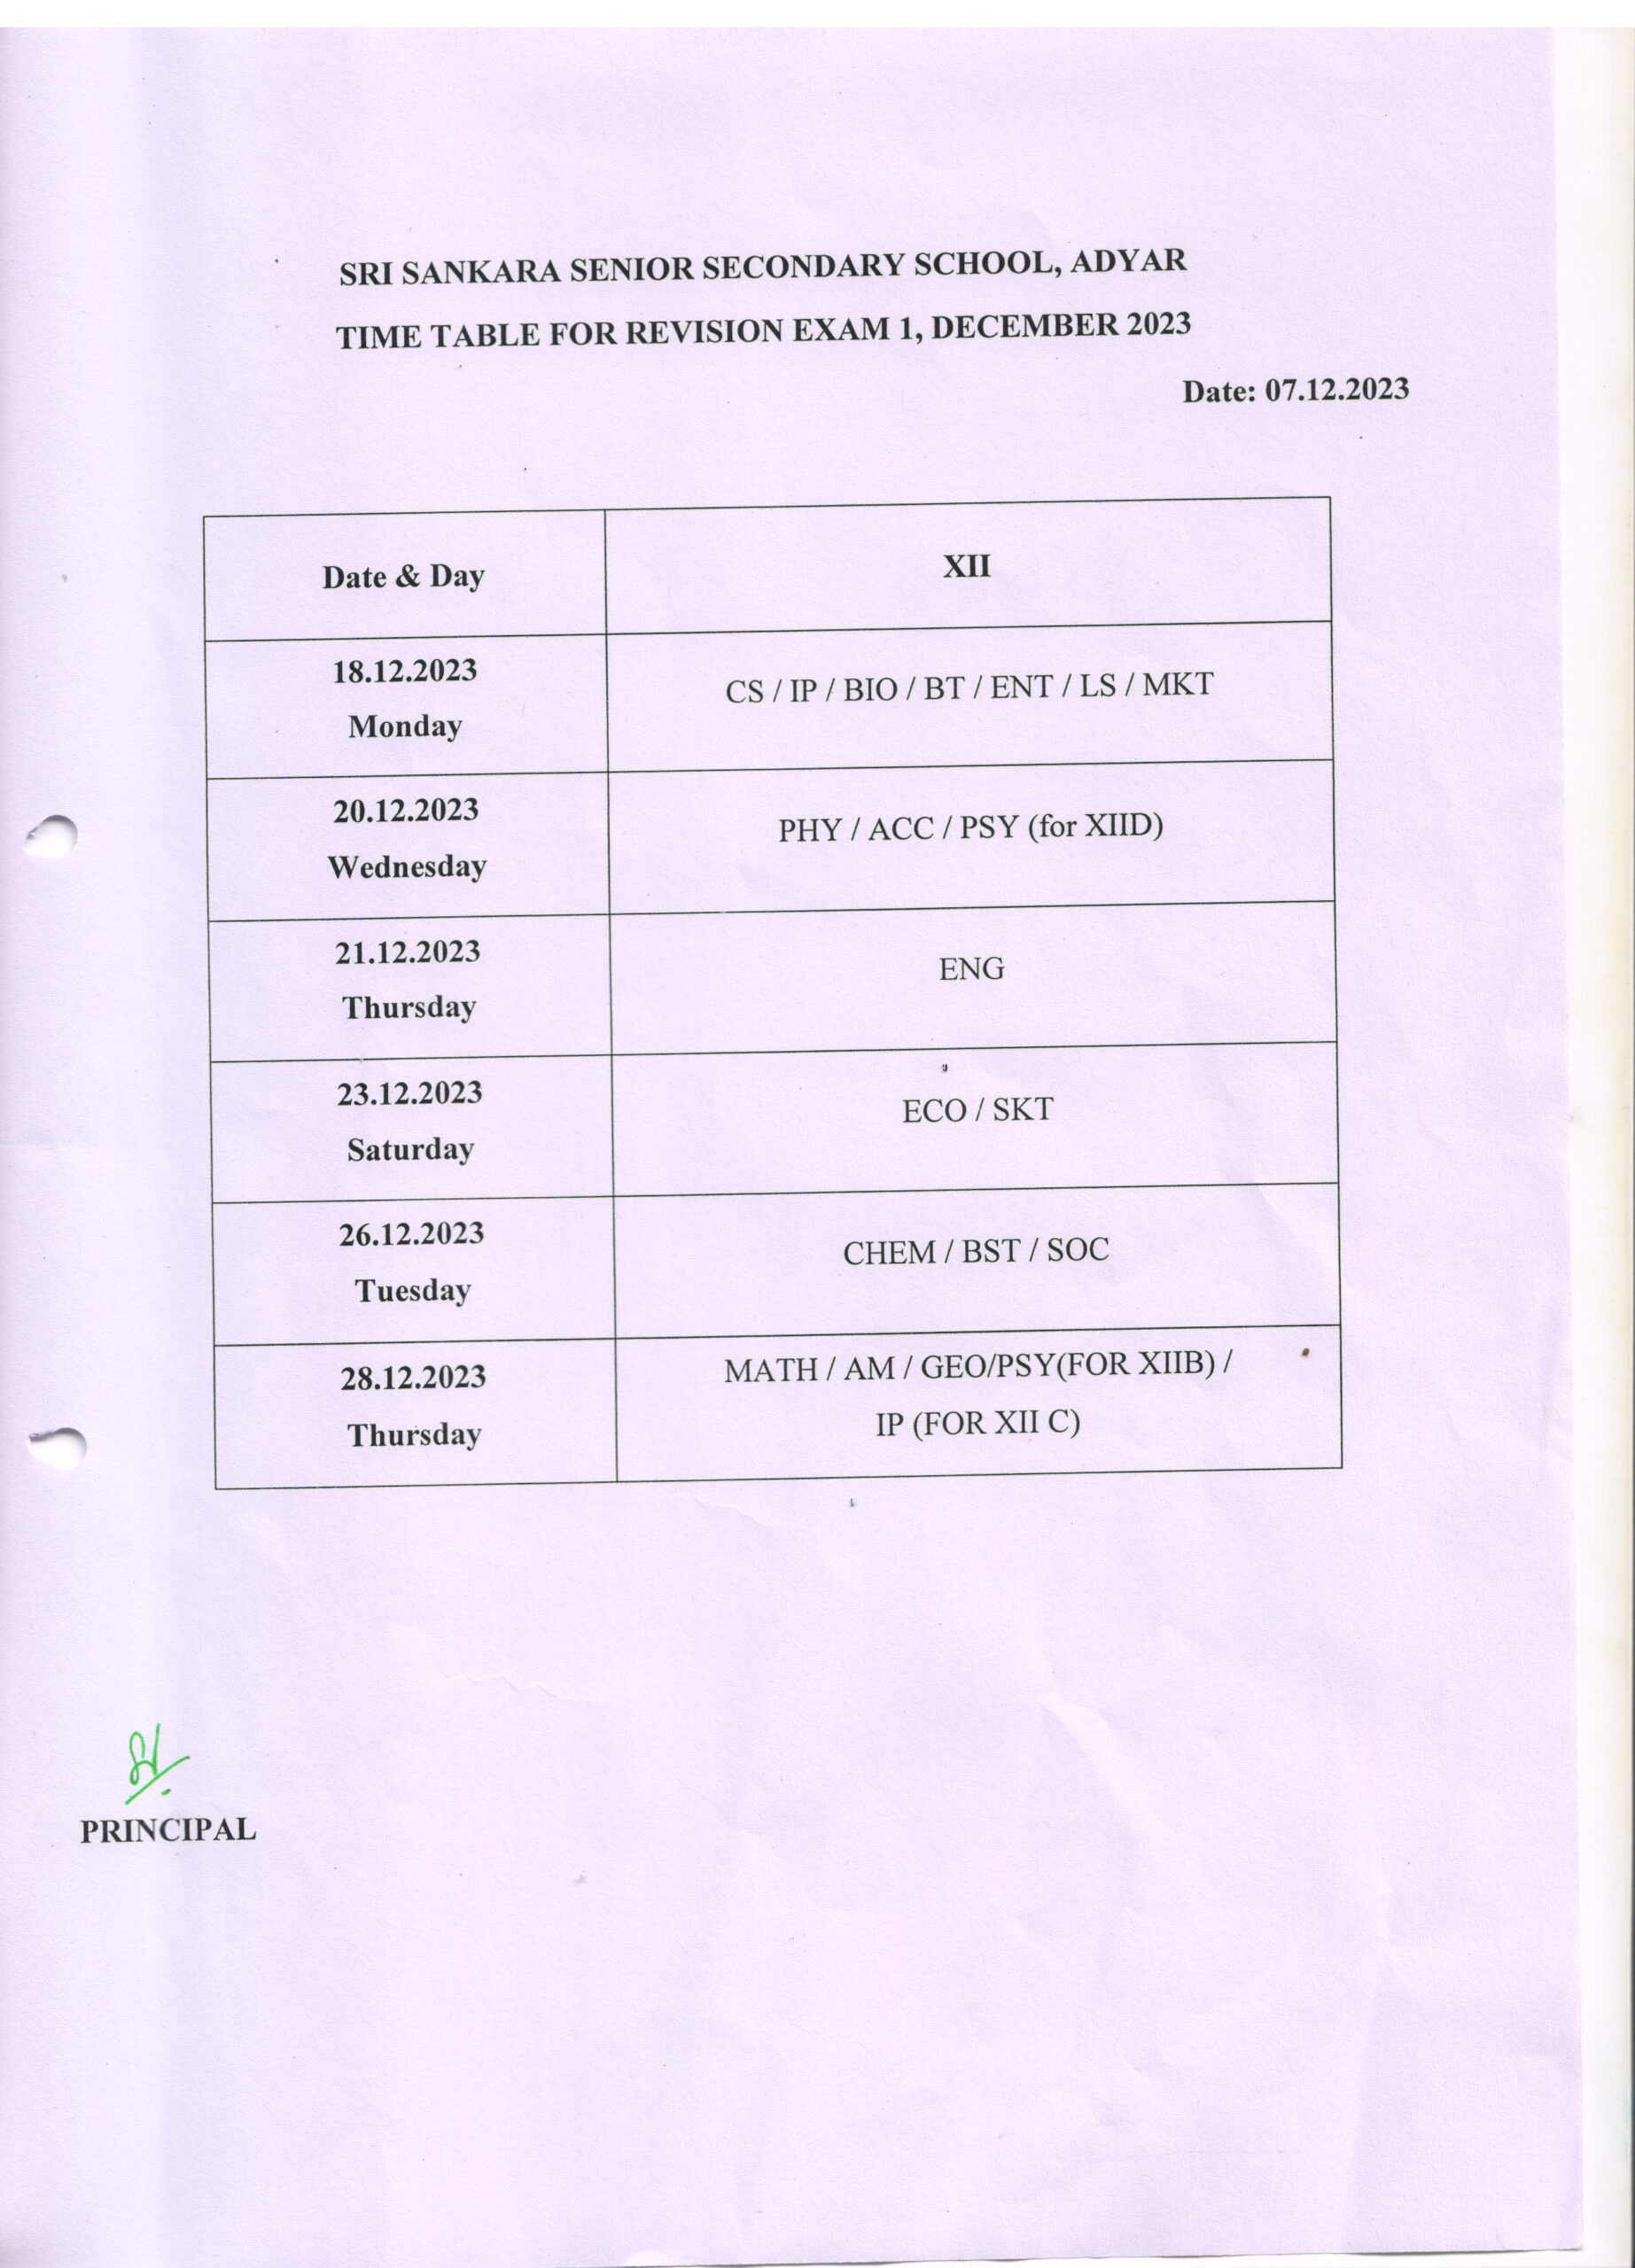 Std XII Revised Time Table for Revision1 - December 2023